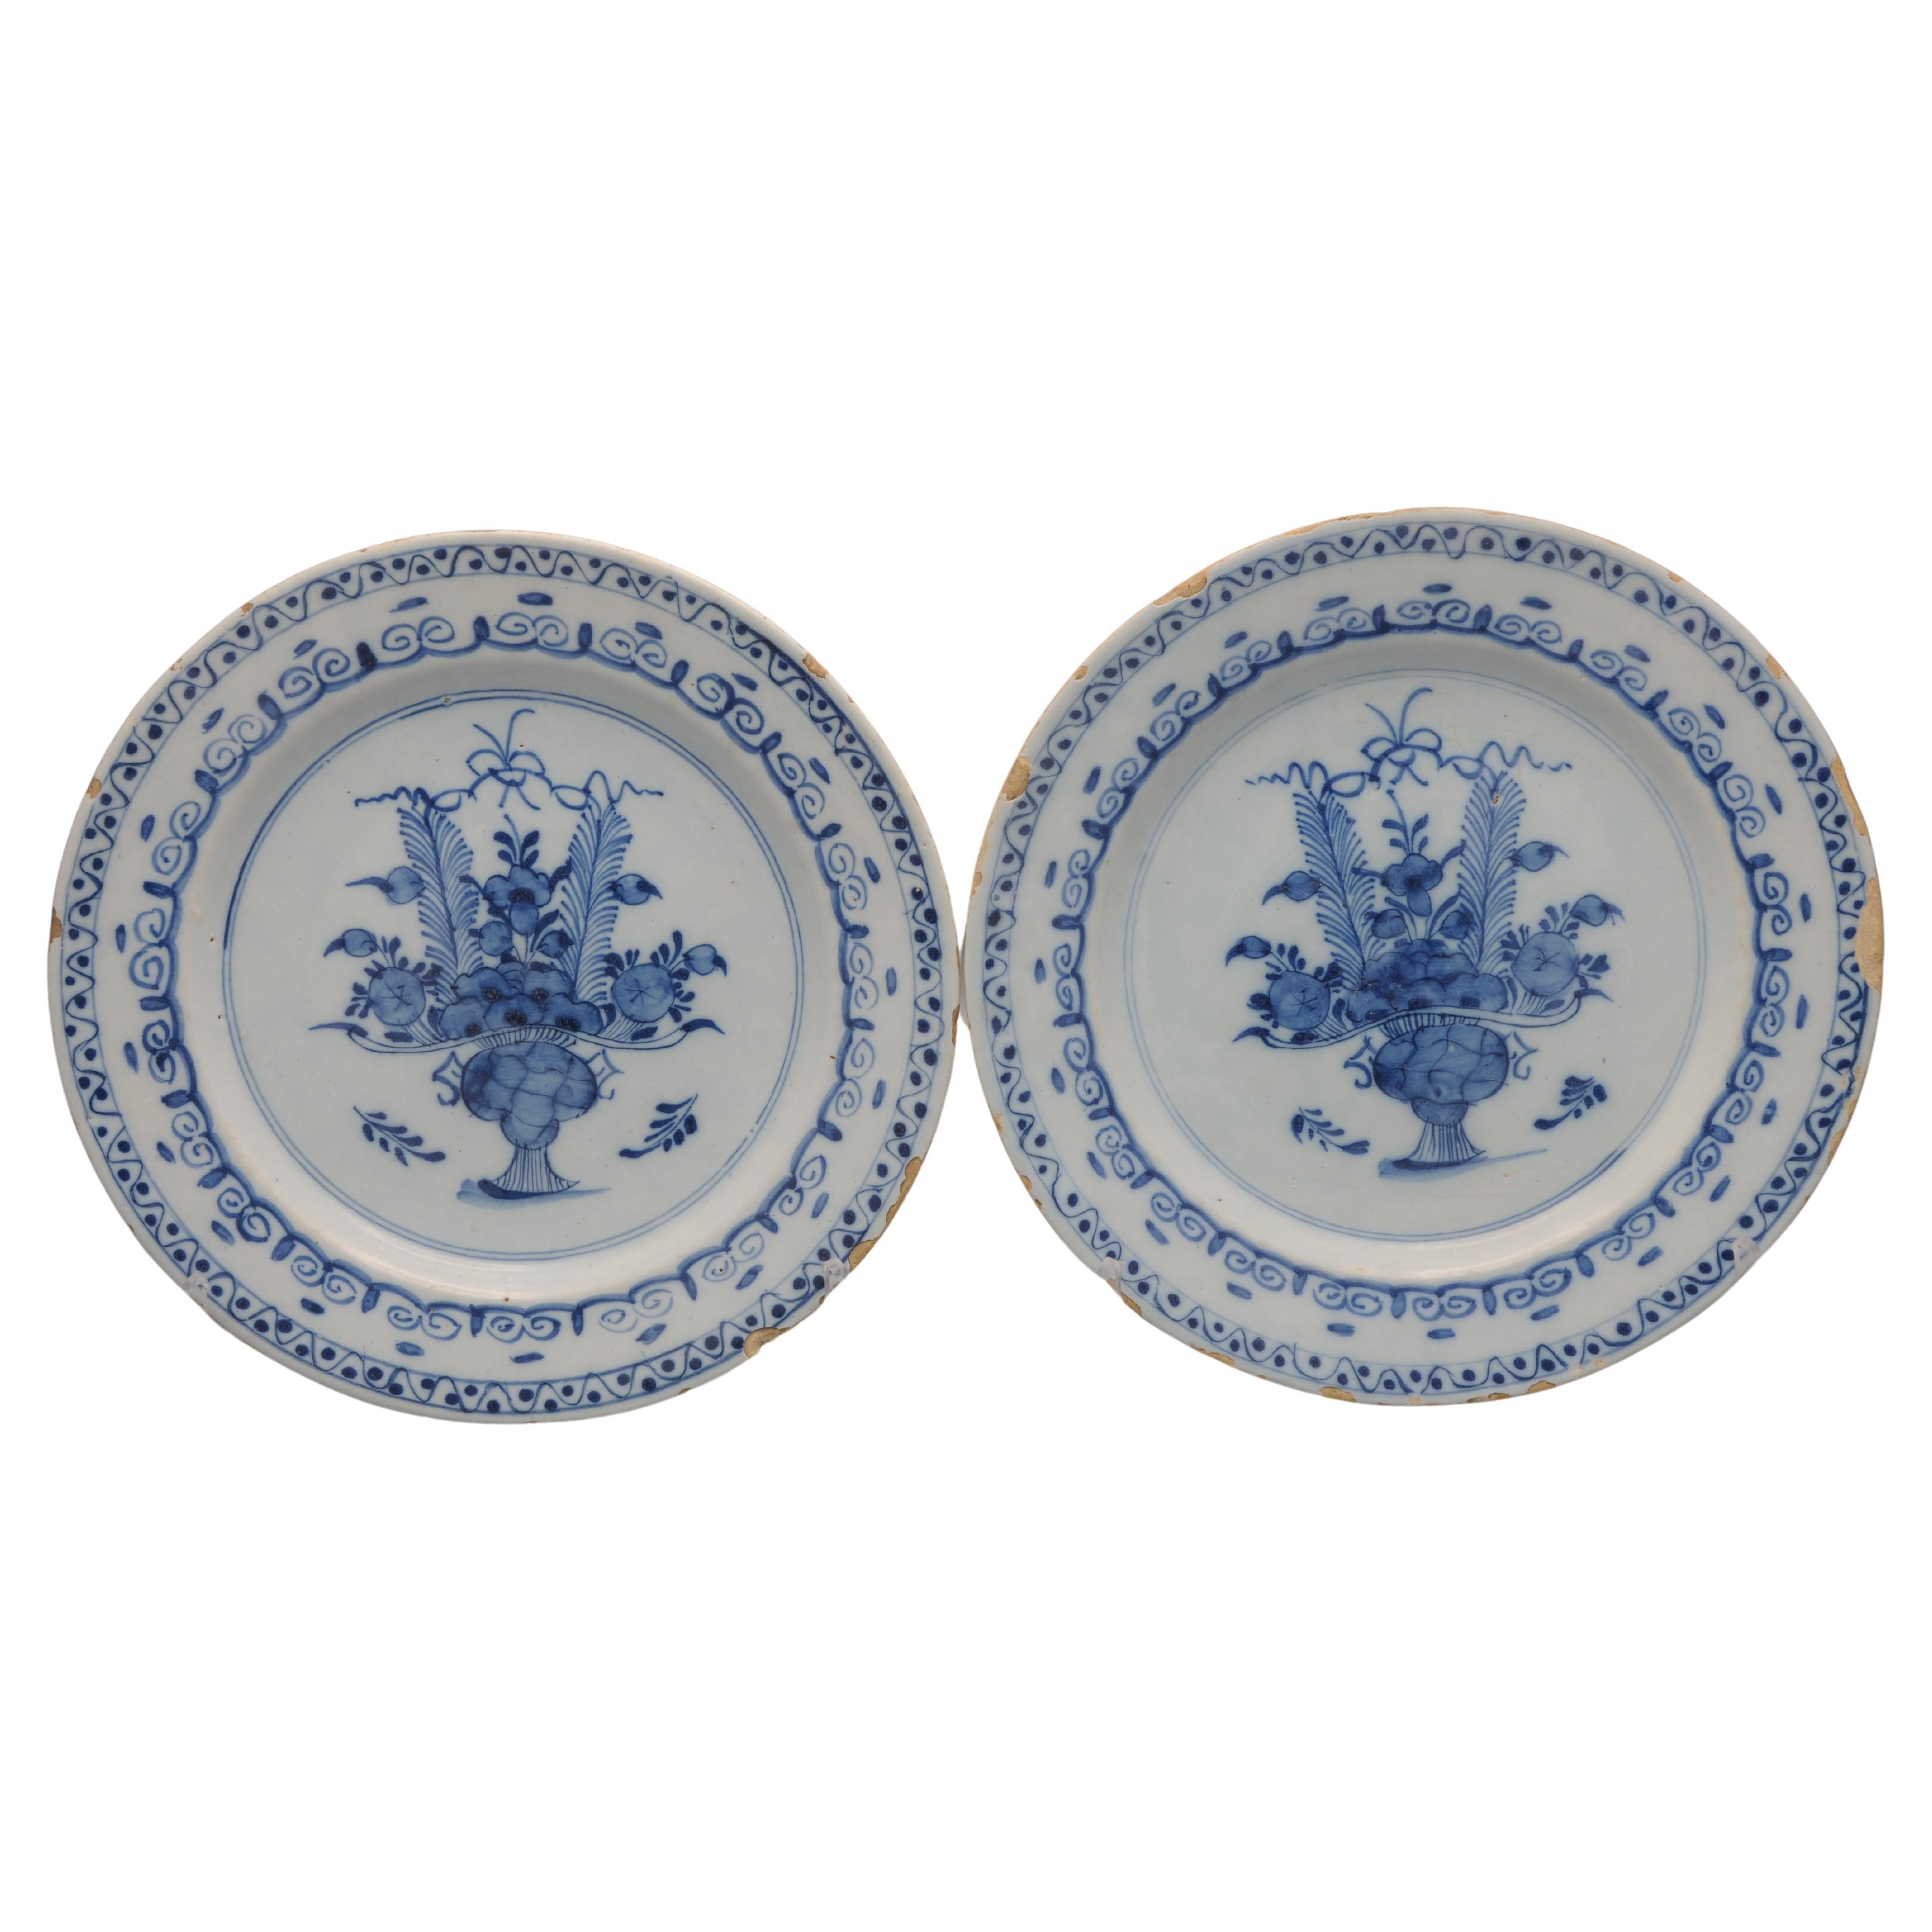 Delft - Pair of neoclassical chinoiserie plates - Late 18th century  For Sale